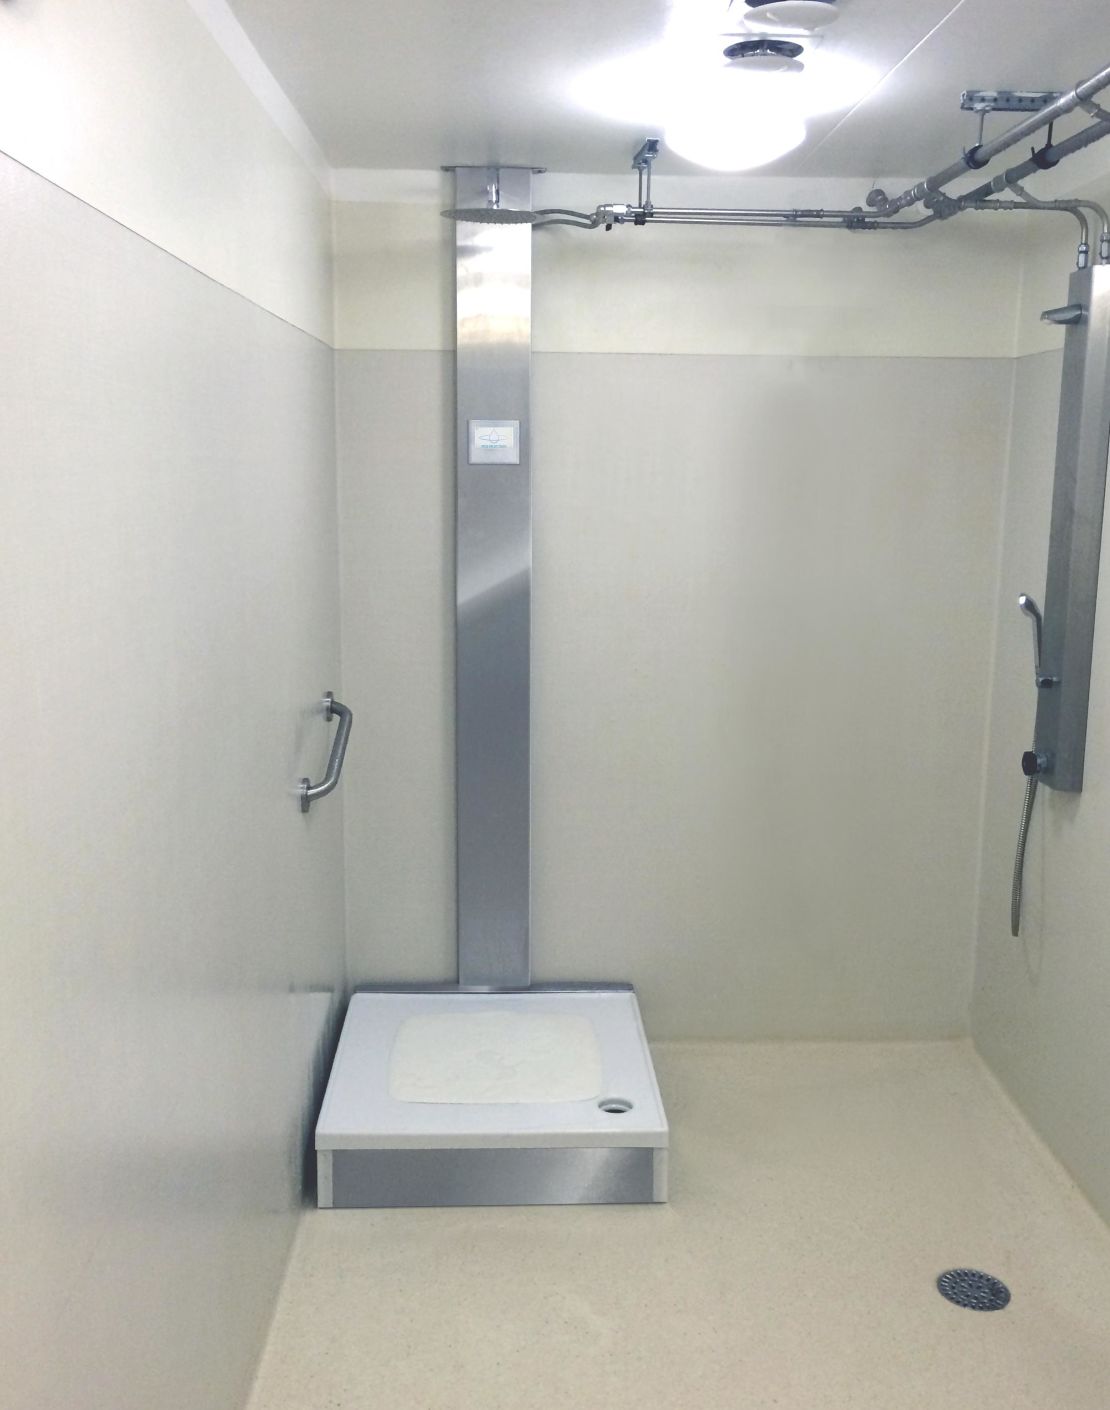 OrbSys shower recycles water as you wash